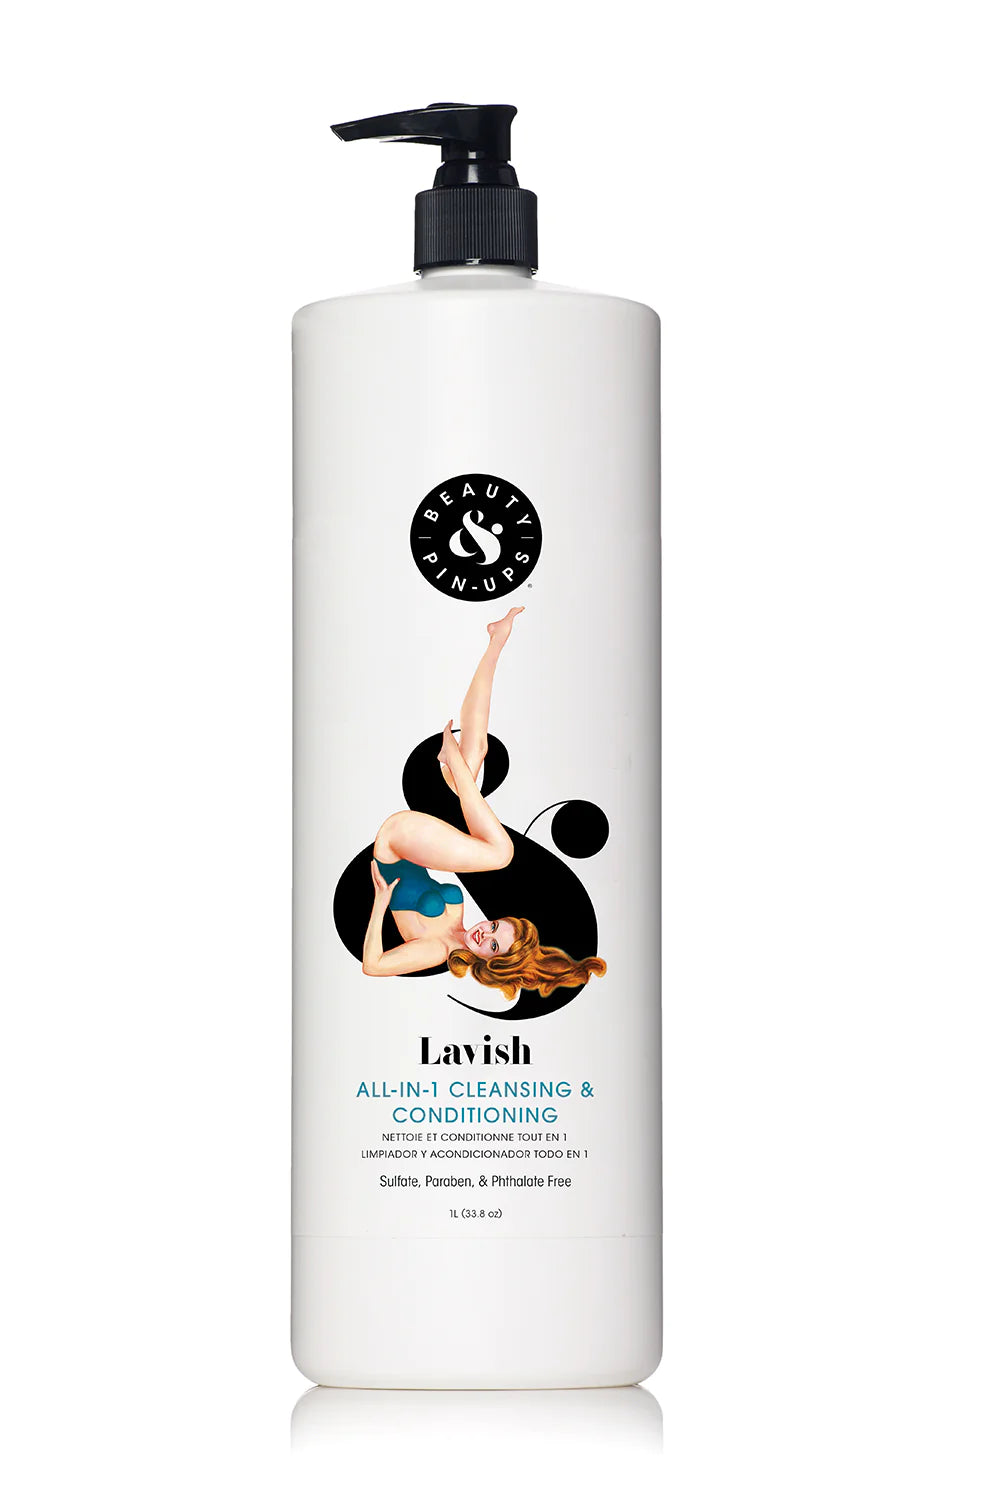 Beauty & Pin Ups Lavish All-In-One Cleansing and Conditioning image of 33.8 oz bottle